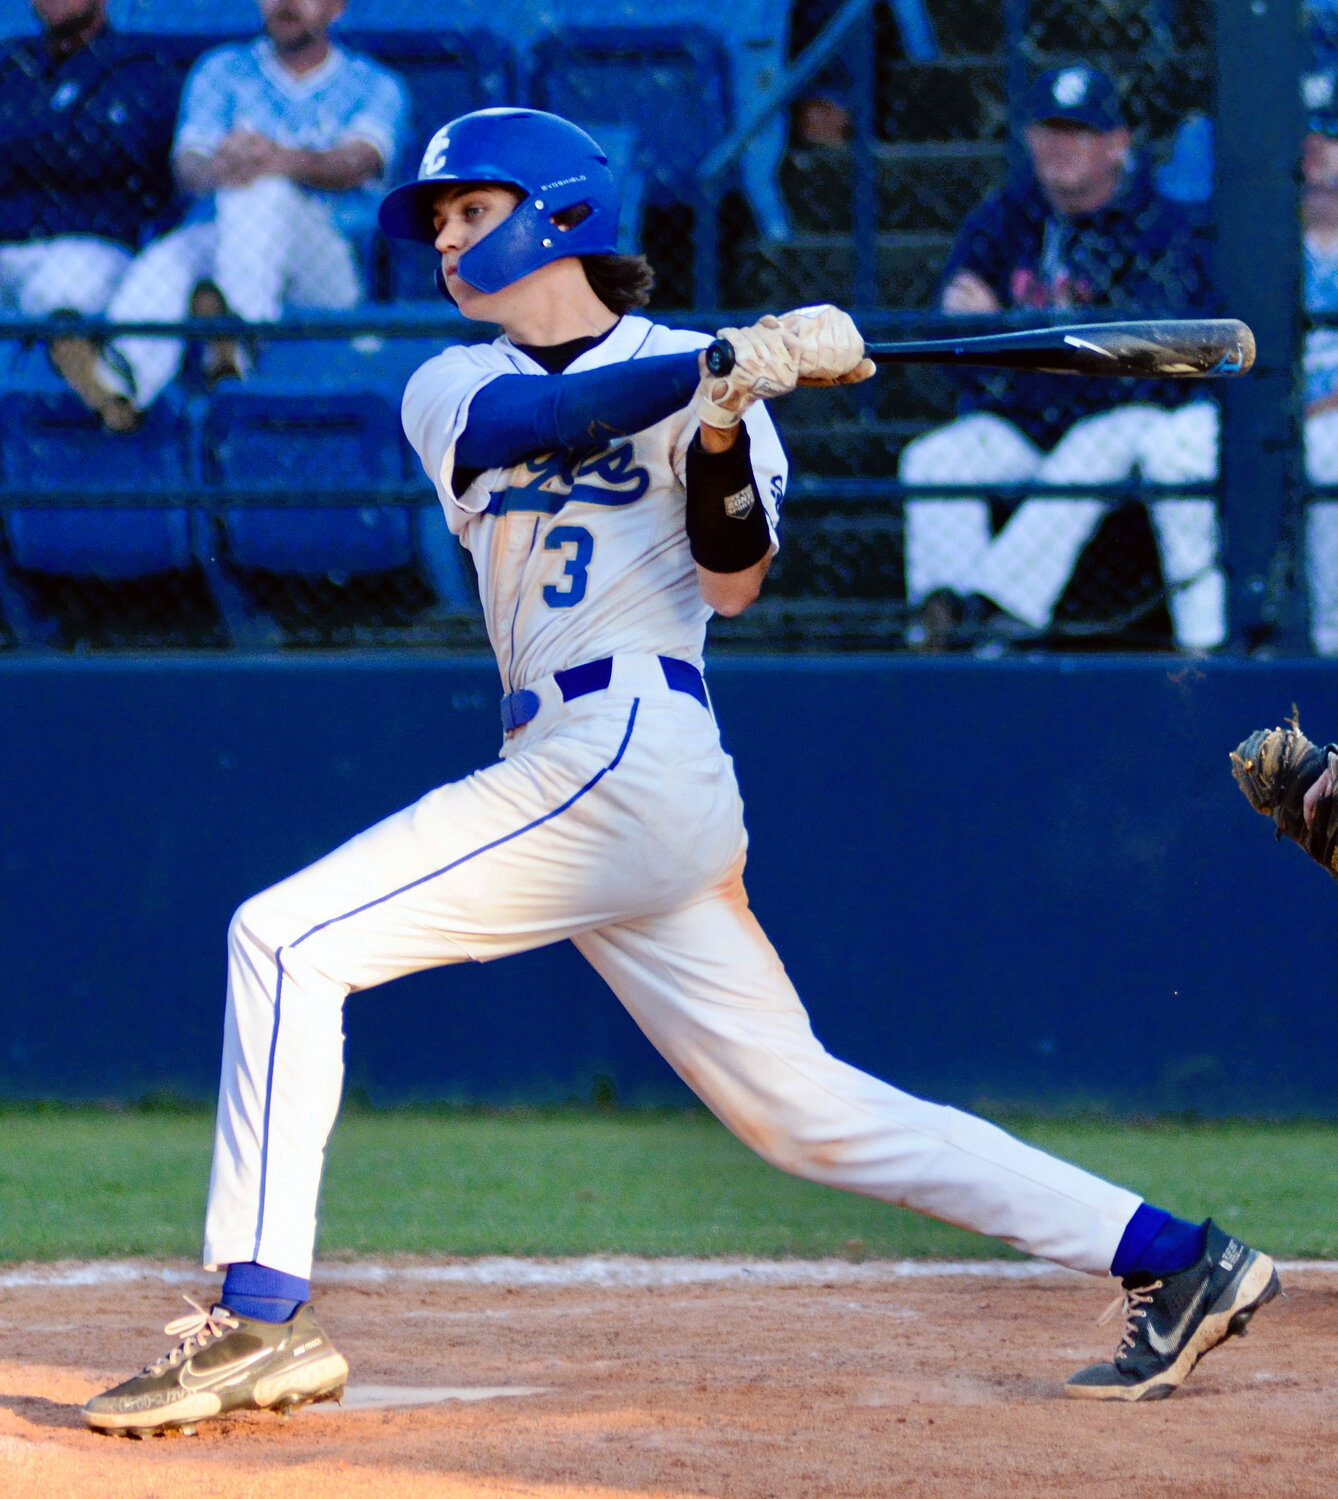 Junior Nick Hopper came up with a two-run walk-off double for Shelbyville Central in district tournament action against Warren County in the bottom of the 10th inning.